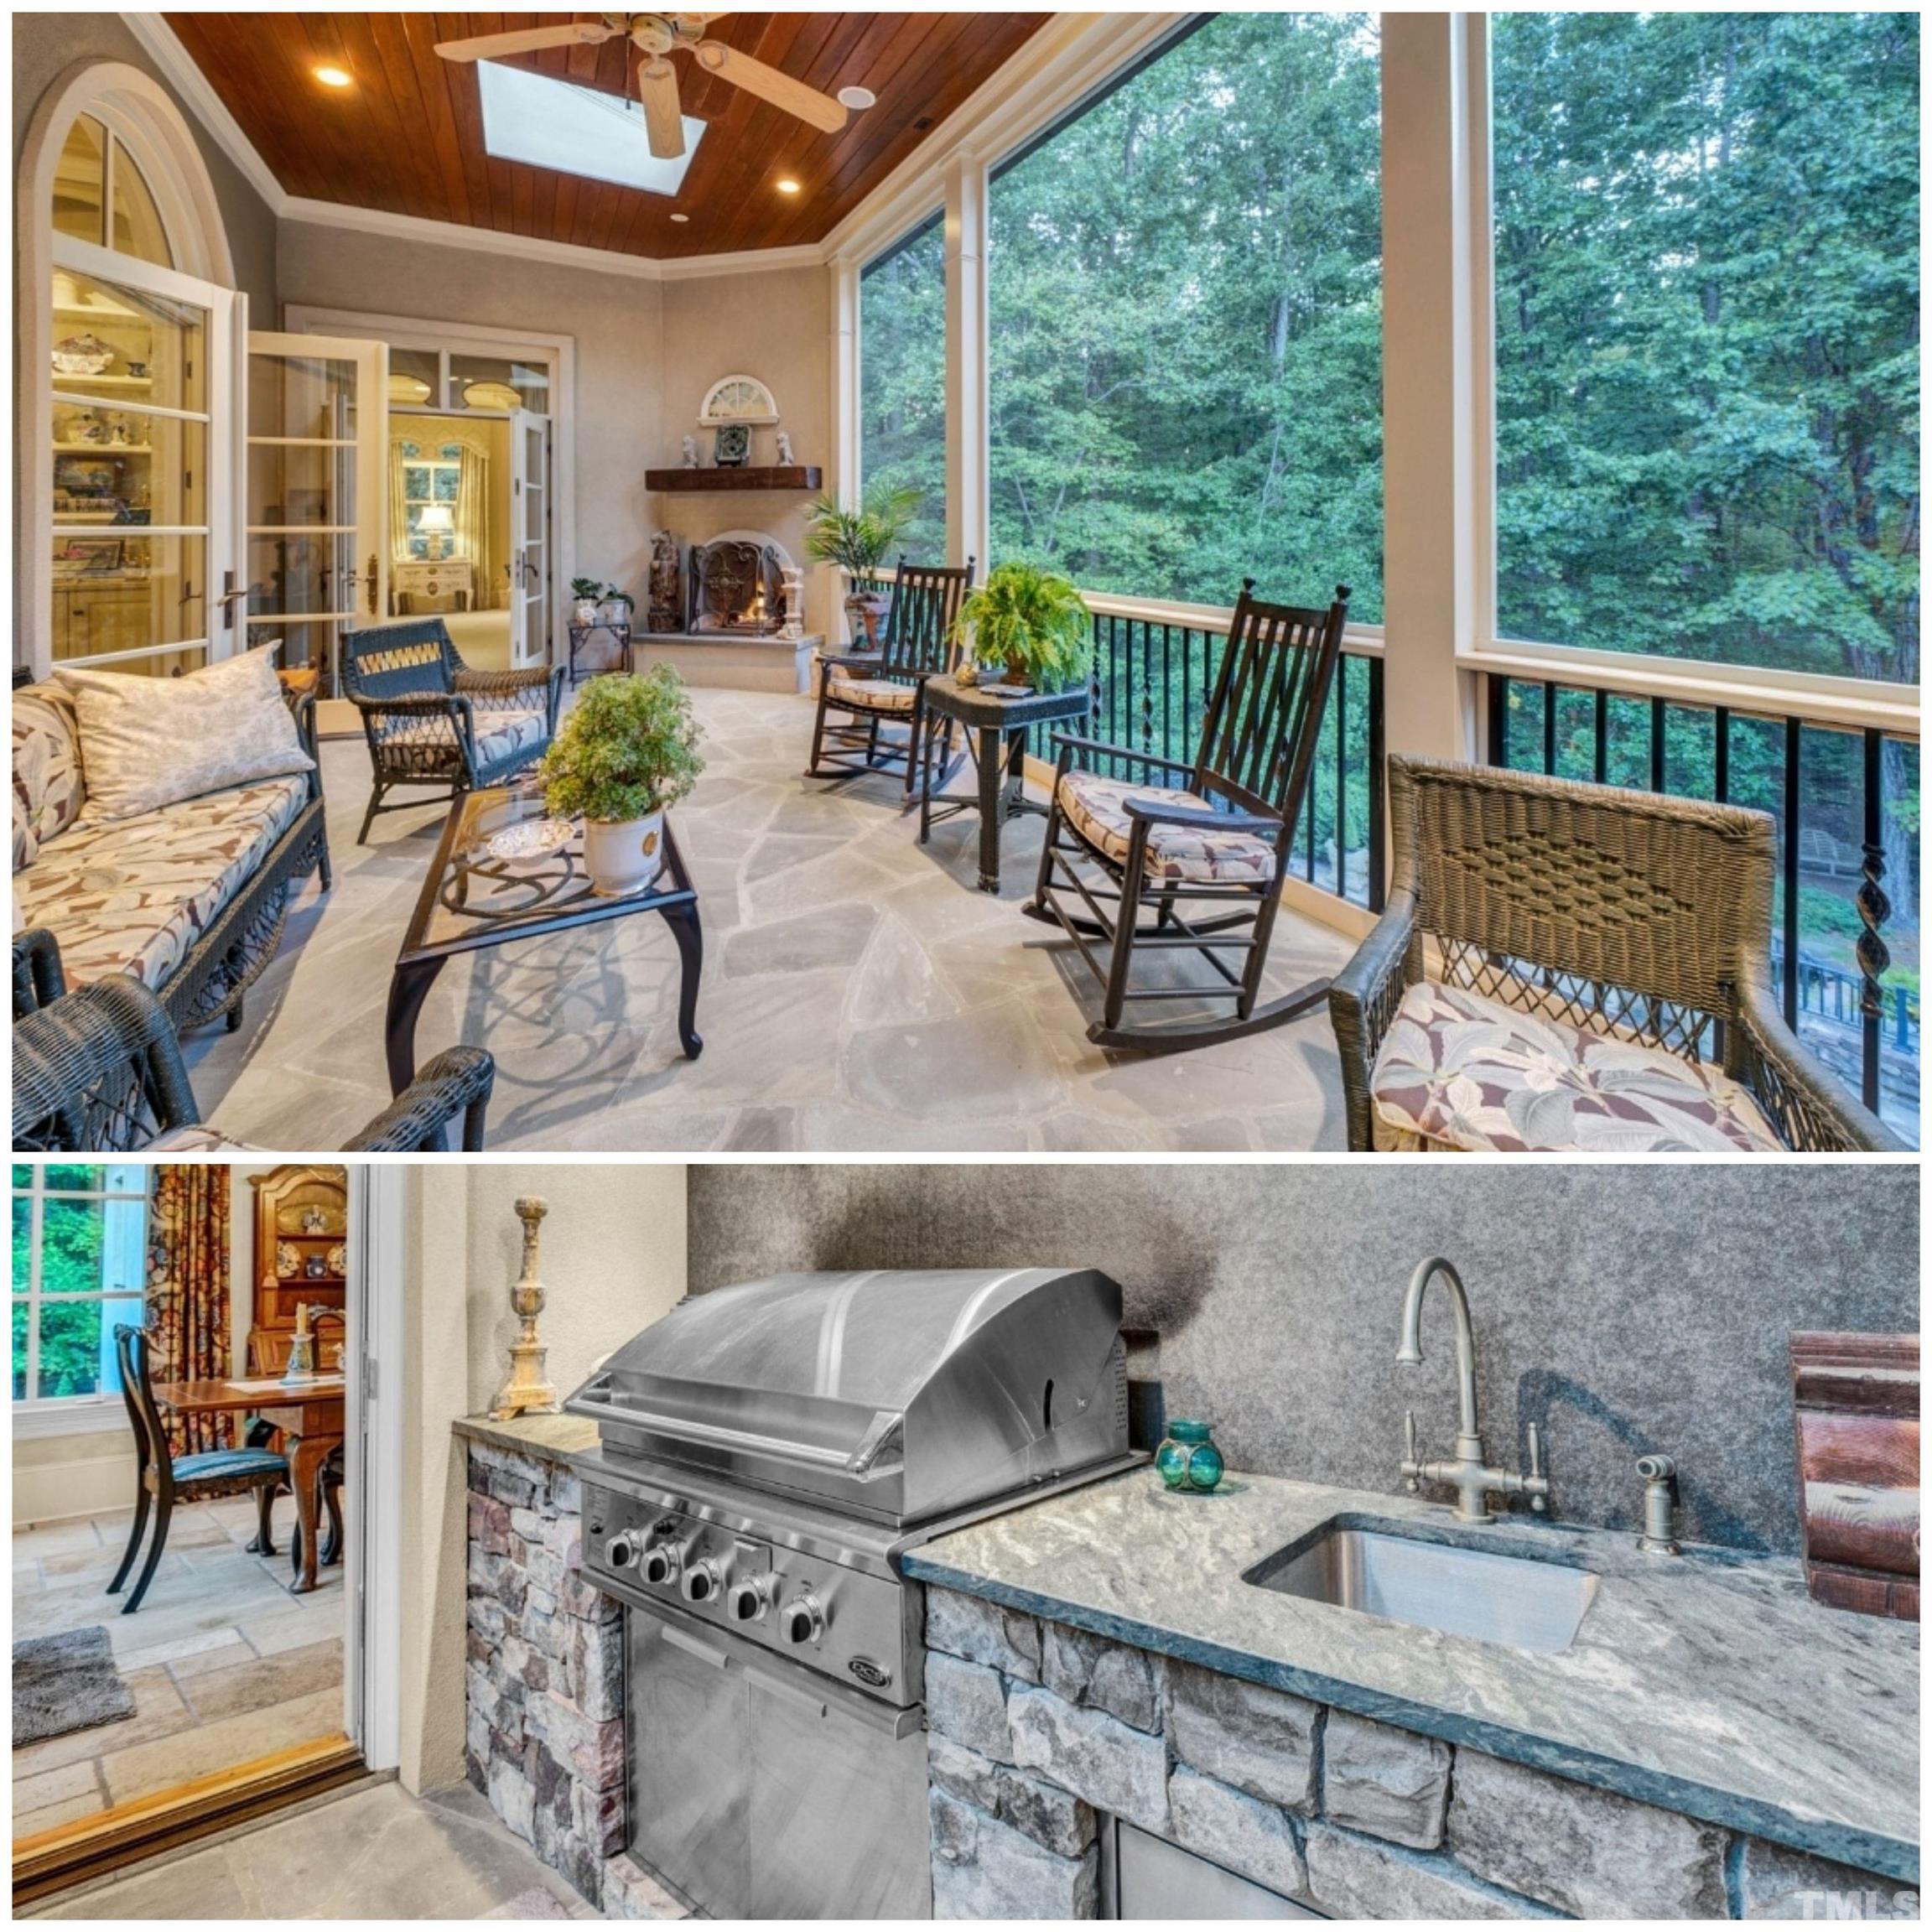 Relax on the screened porch w/stone profile fireplace, and outdoor grill.  Screened porch has double doors leading from family, master suite and breakfast room.  Skylights for extra lighting and breathtaking views of backyard.